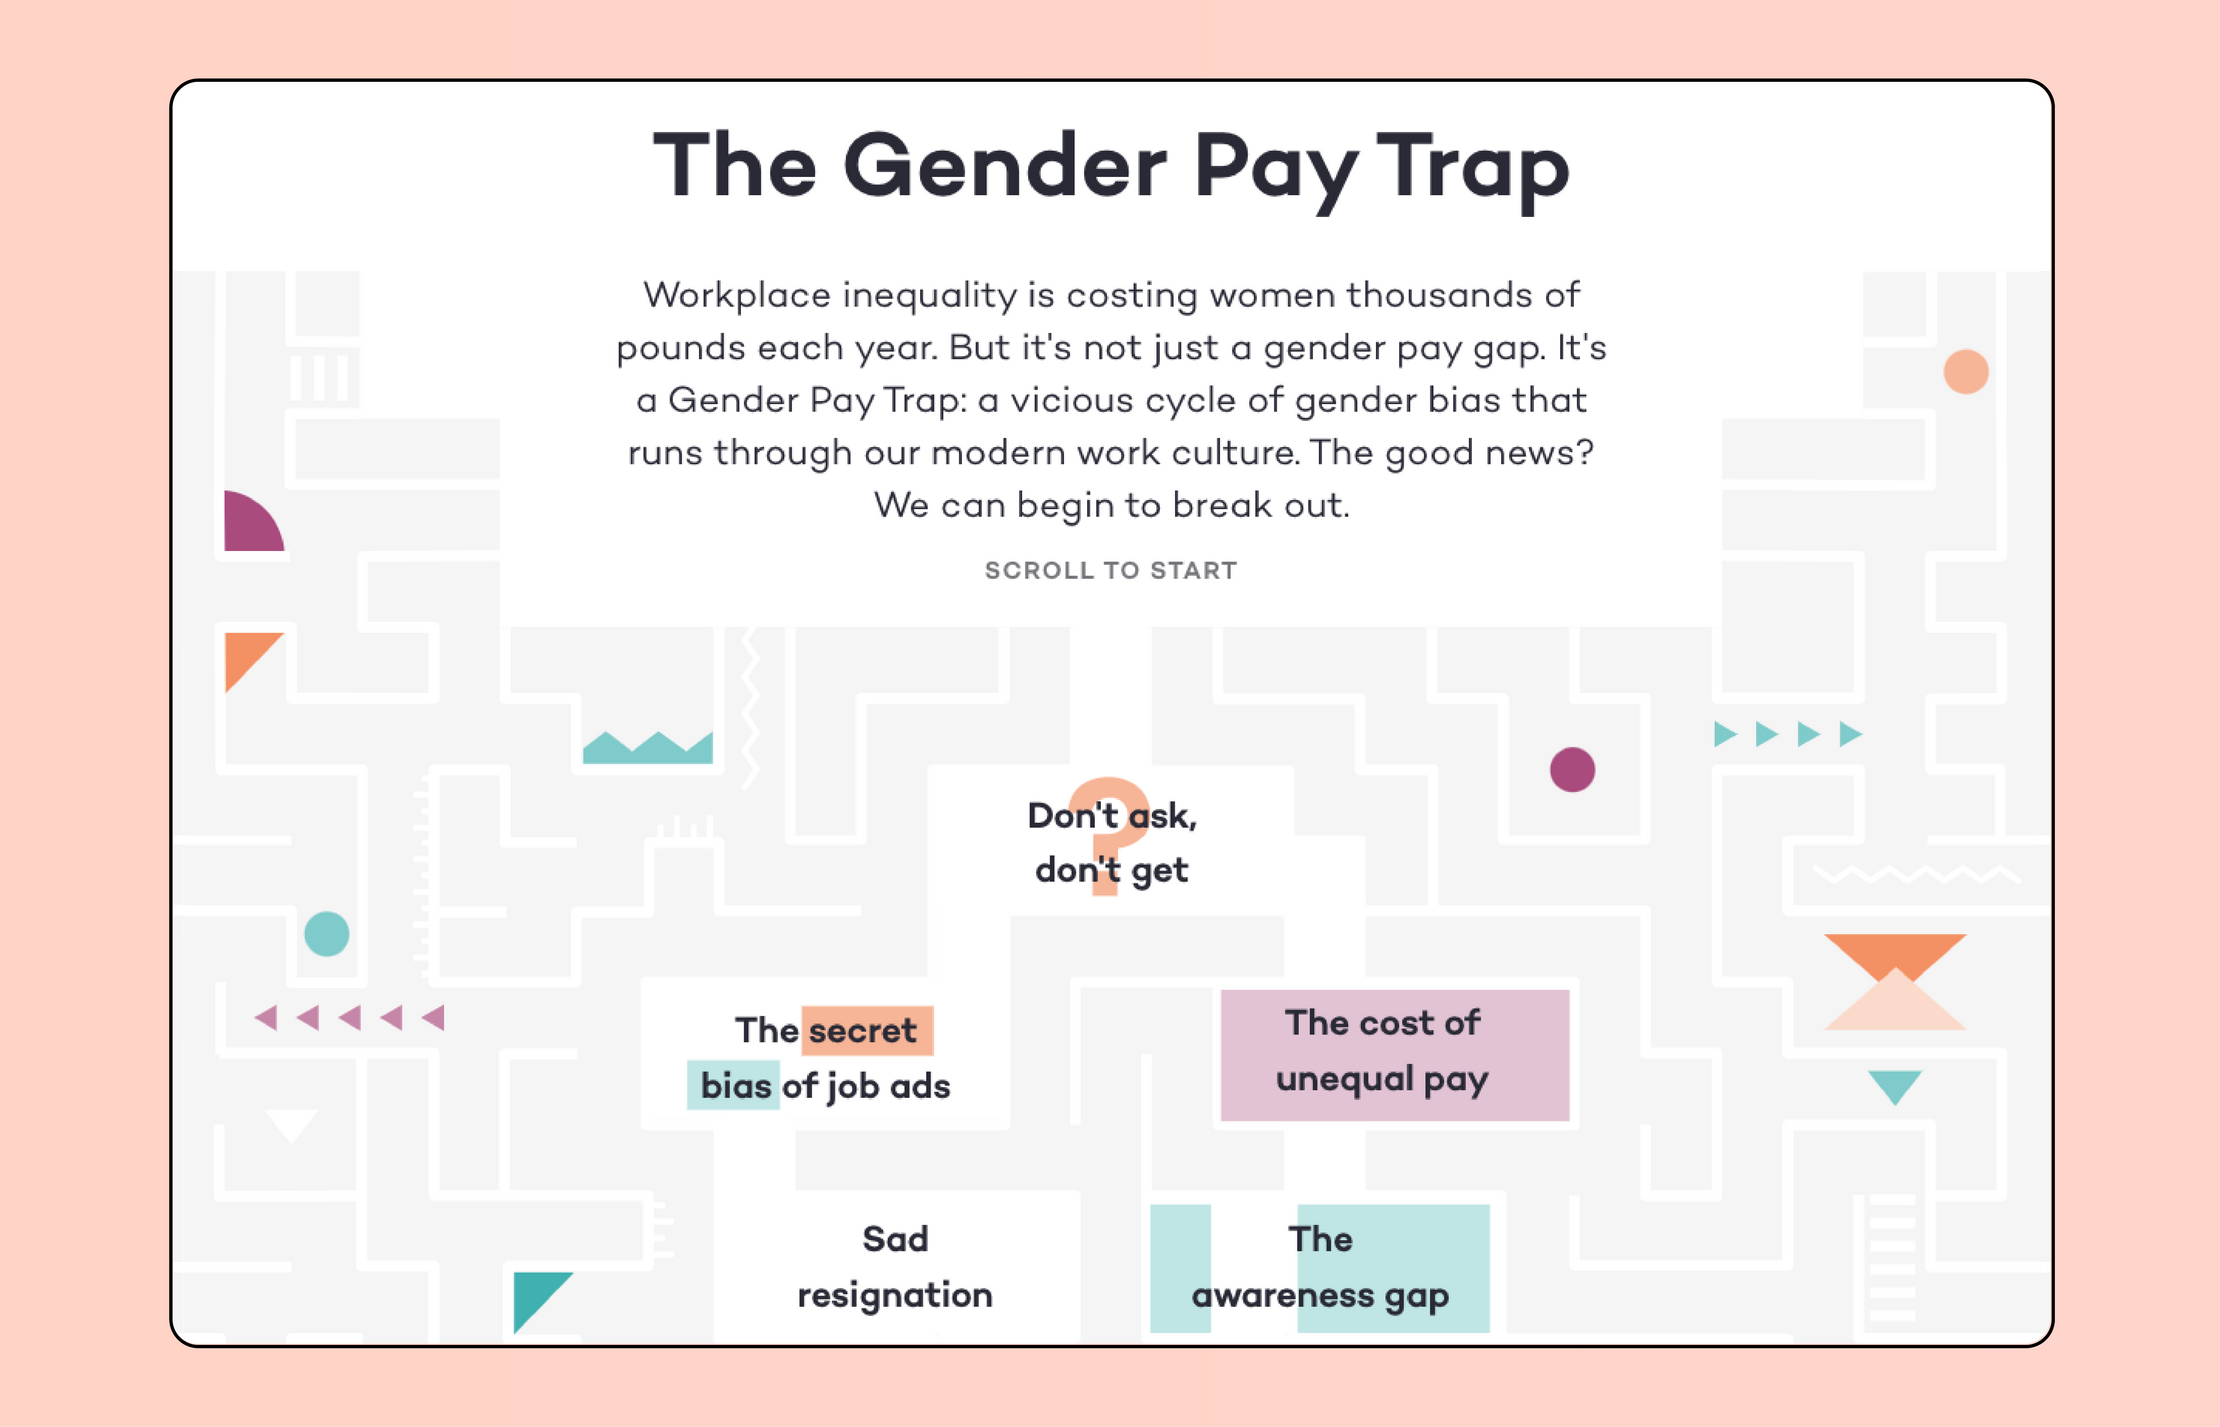 The front of the Gender Pay Trap website. It shows several geometric shapes and the five stages of the Gender Pay Trap: Dont, ask don't get, the cost of unequal pay, the awareness gap, sad resignation, the secret bias of job ads.